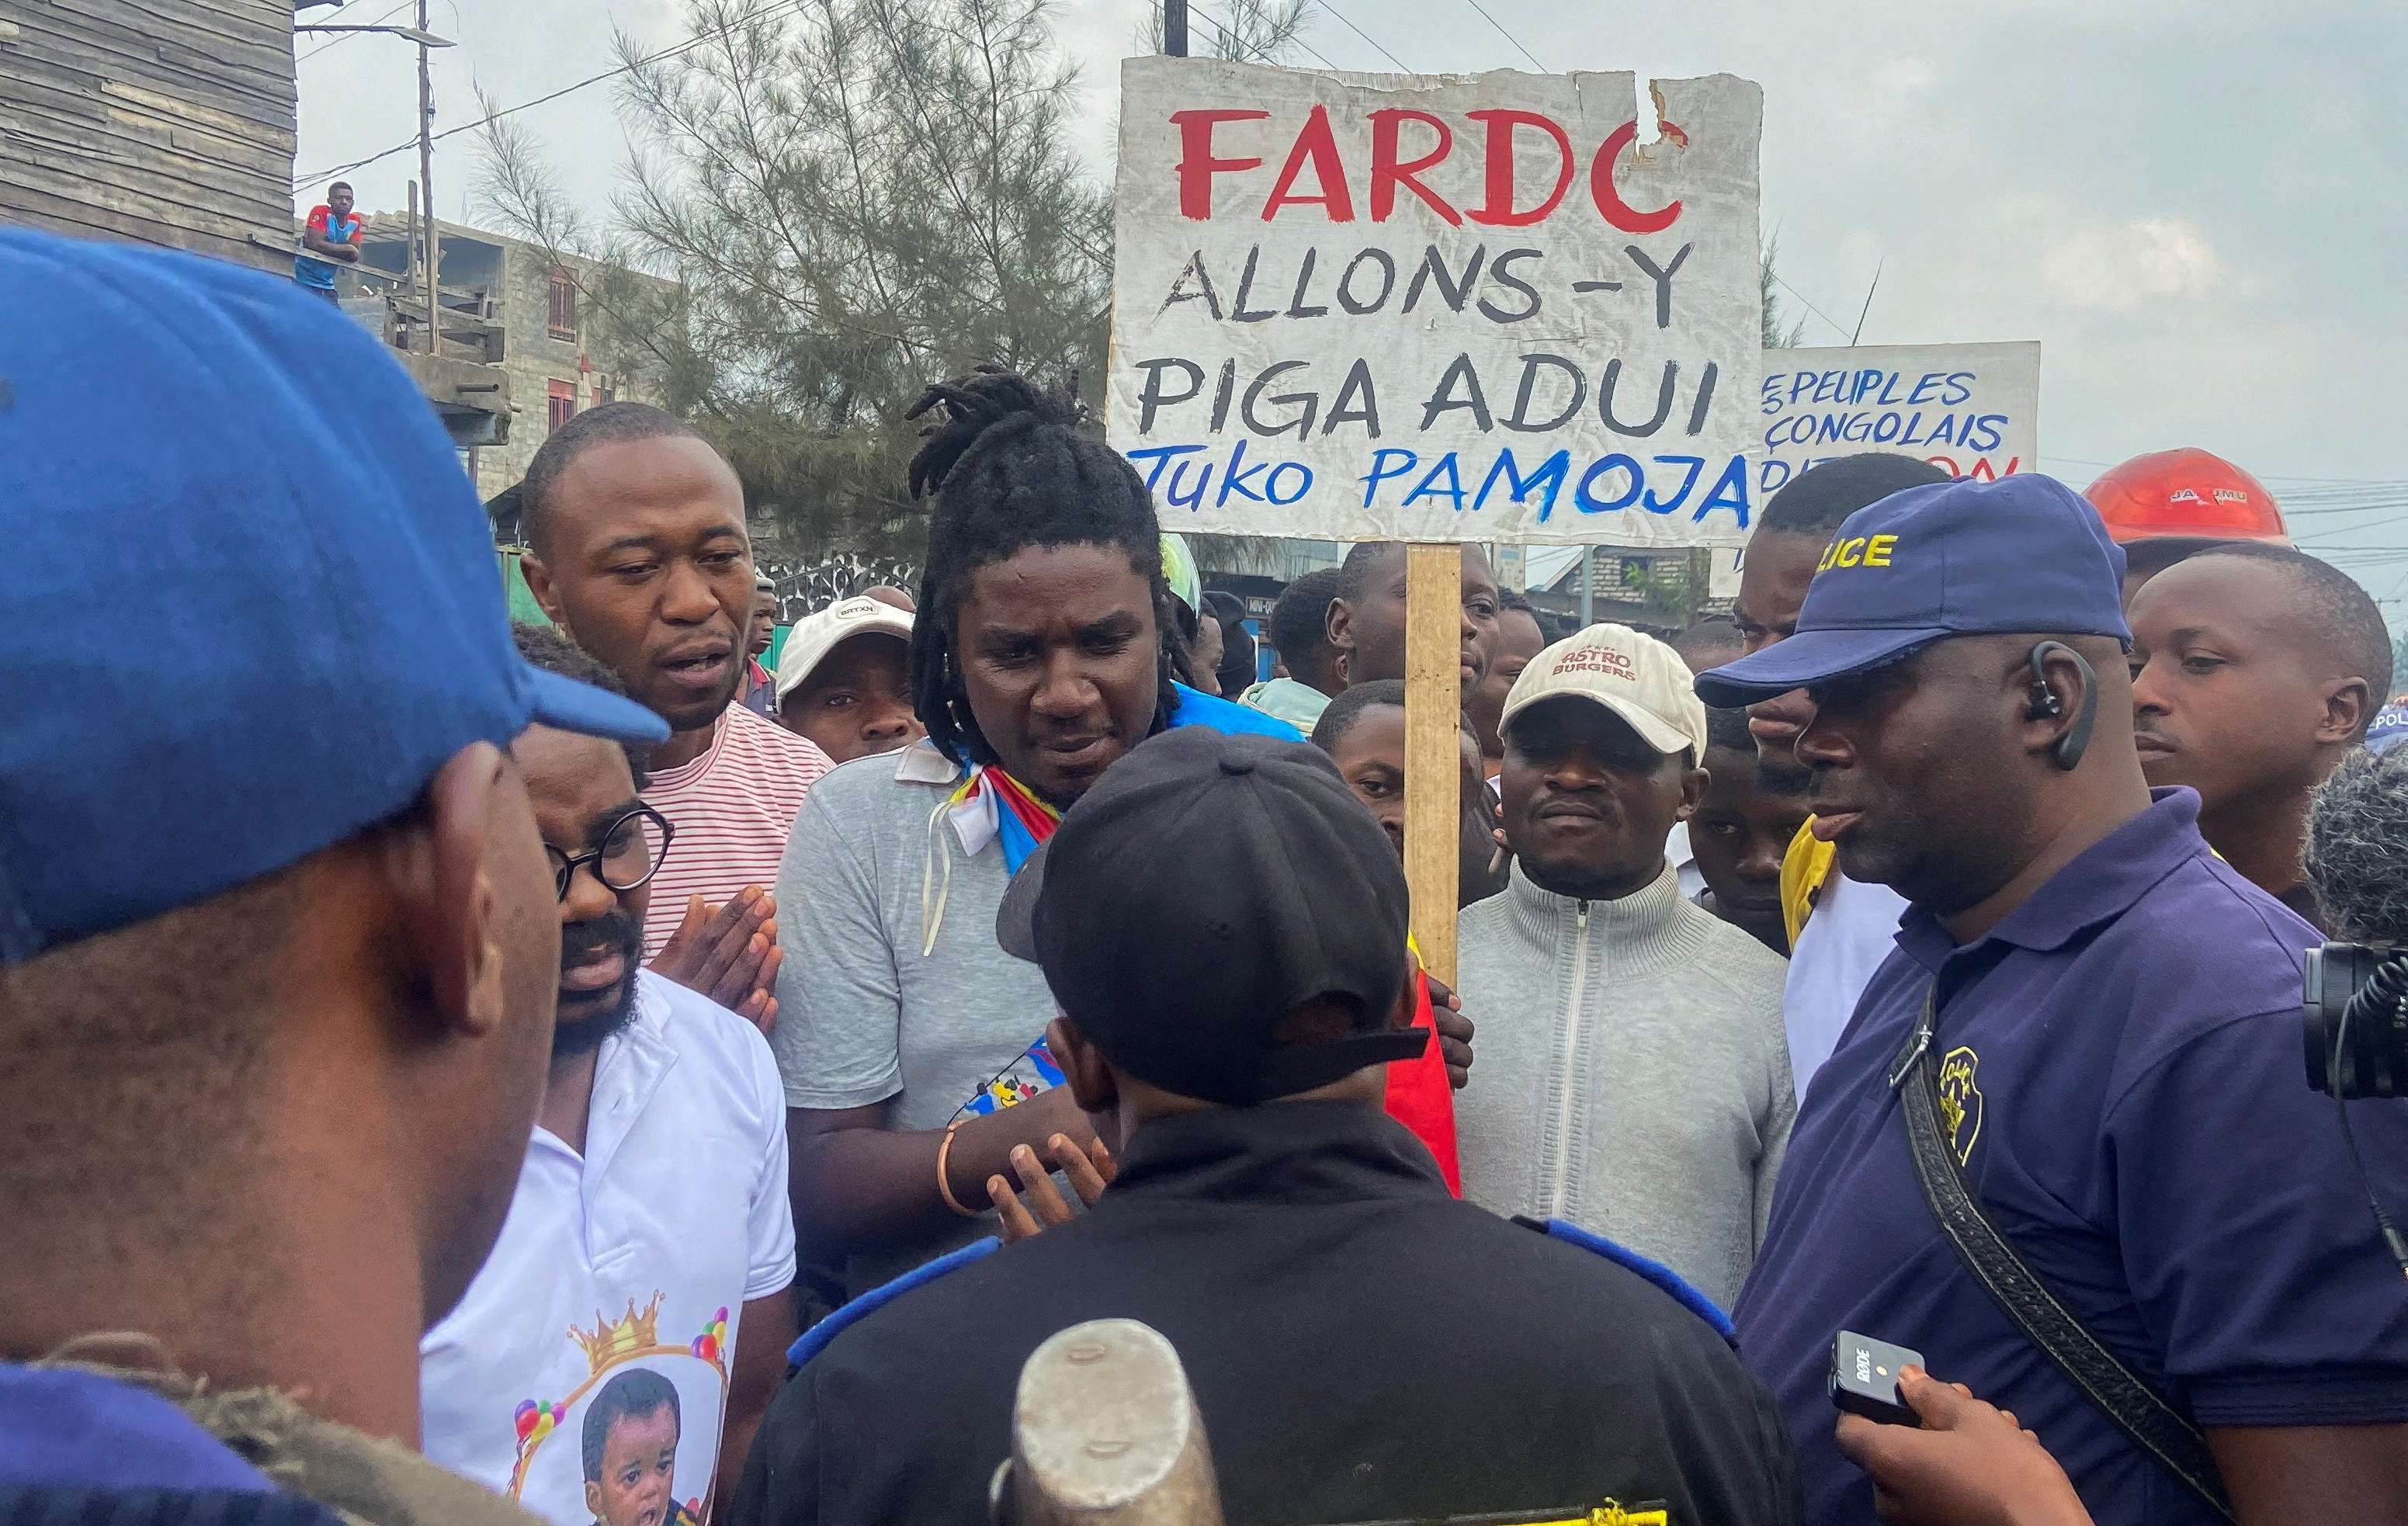 Congo police scatter protesters denouncing slow M23 rebel pullback in Goma